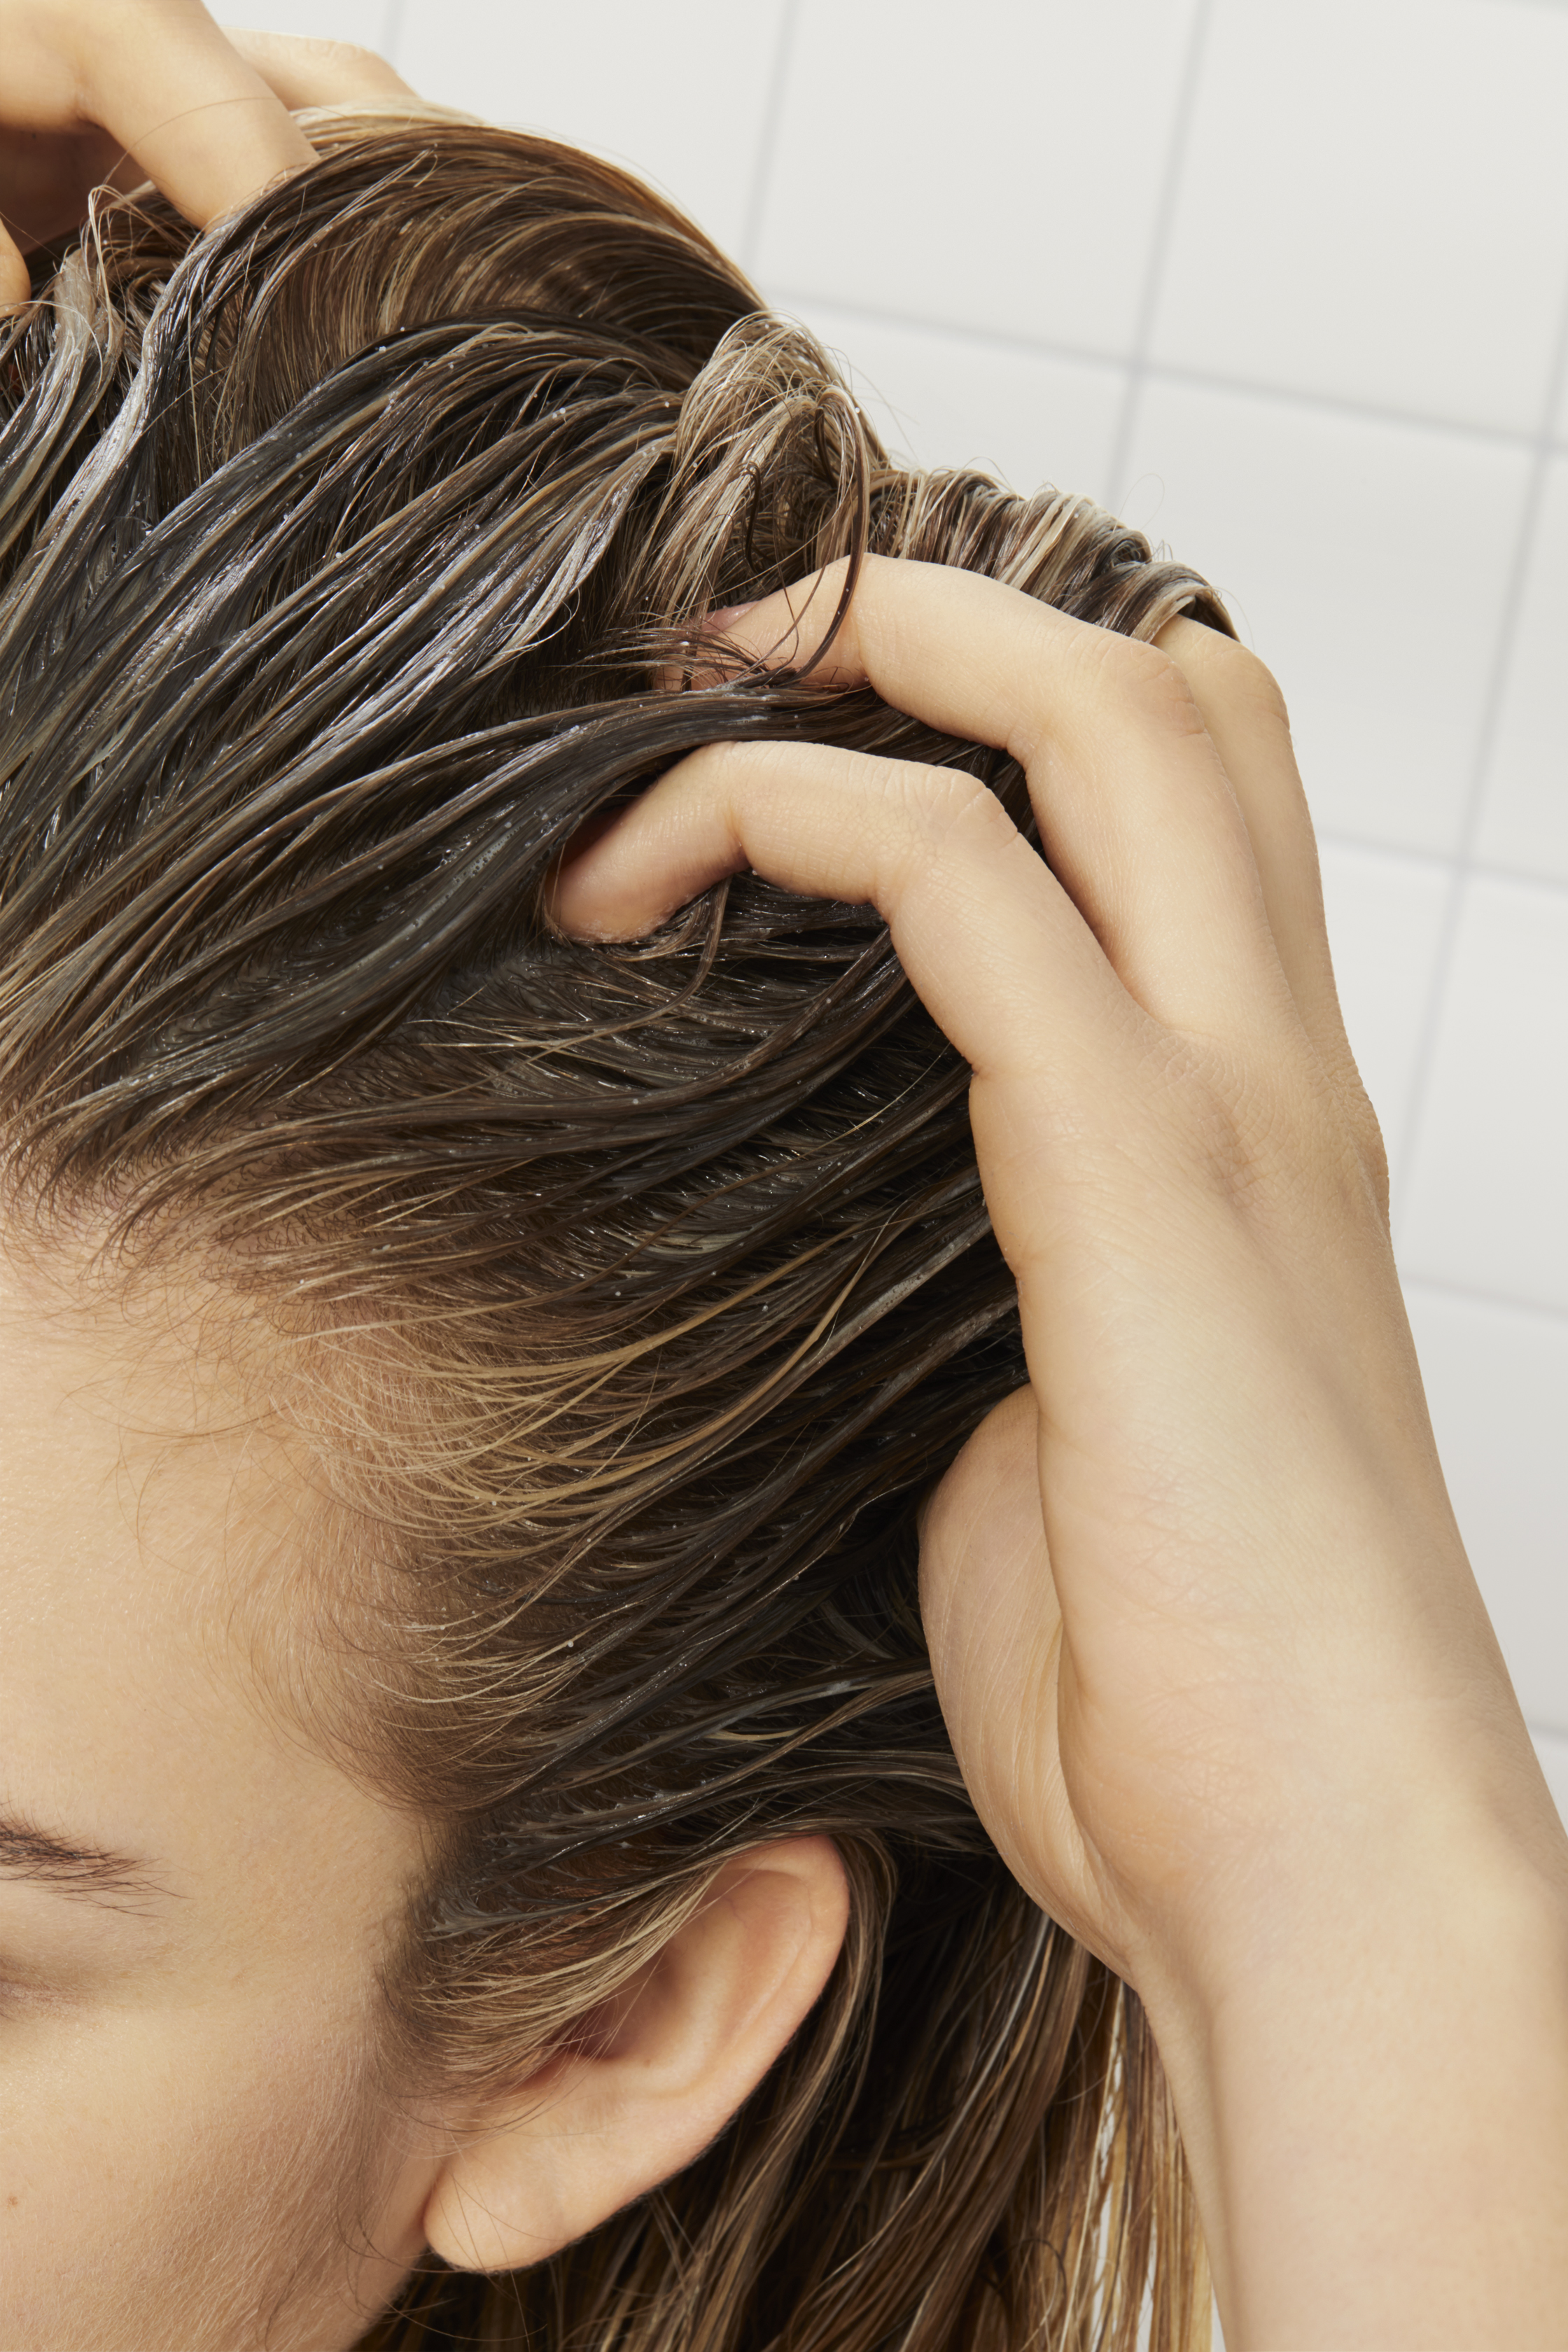 Why Does Your Hair Hurt? Derms Break Down the Potential Reasons